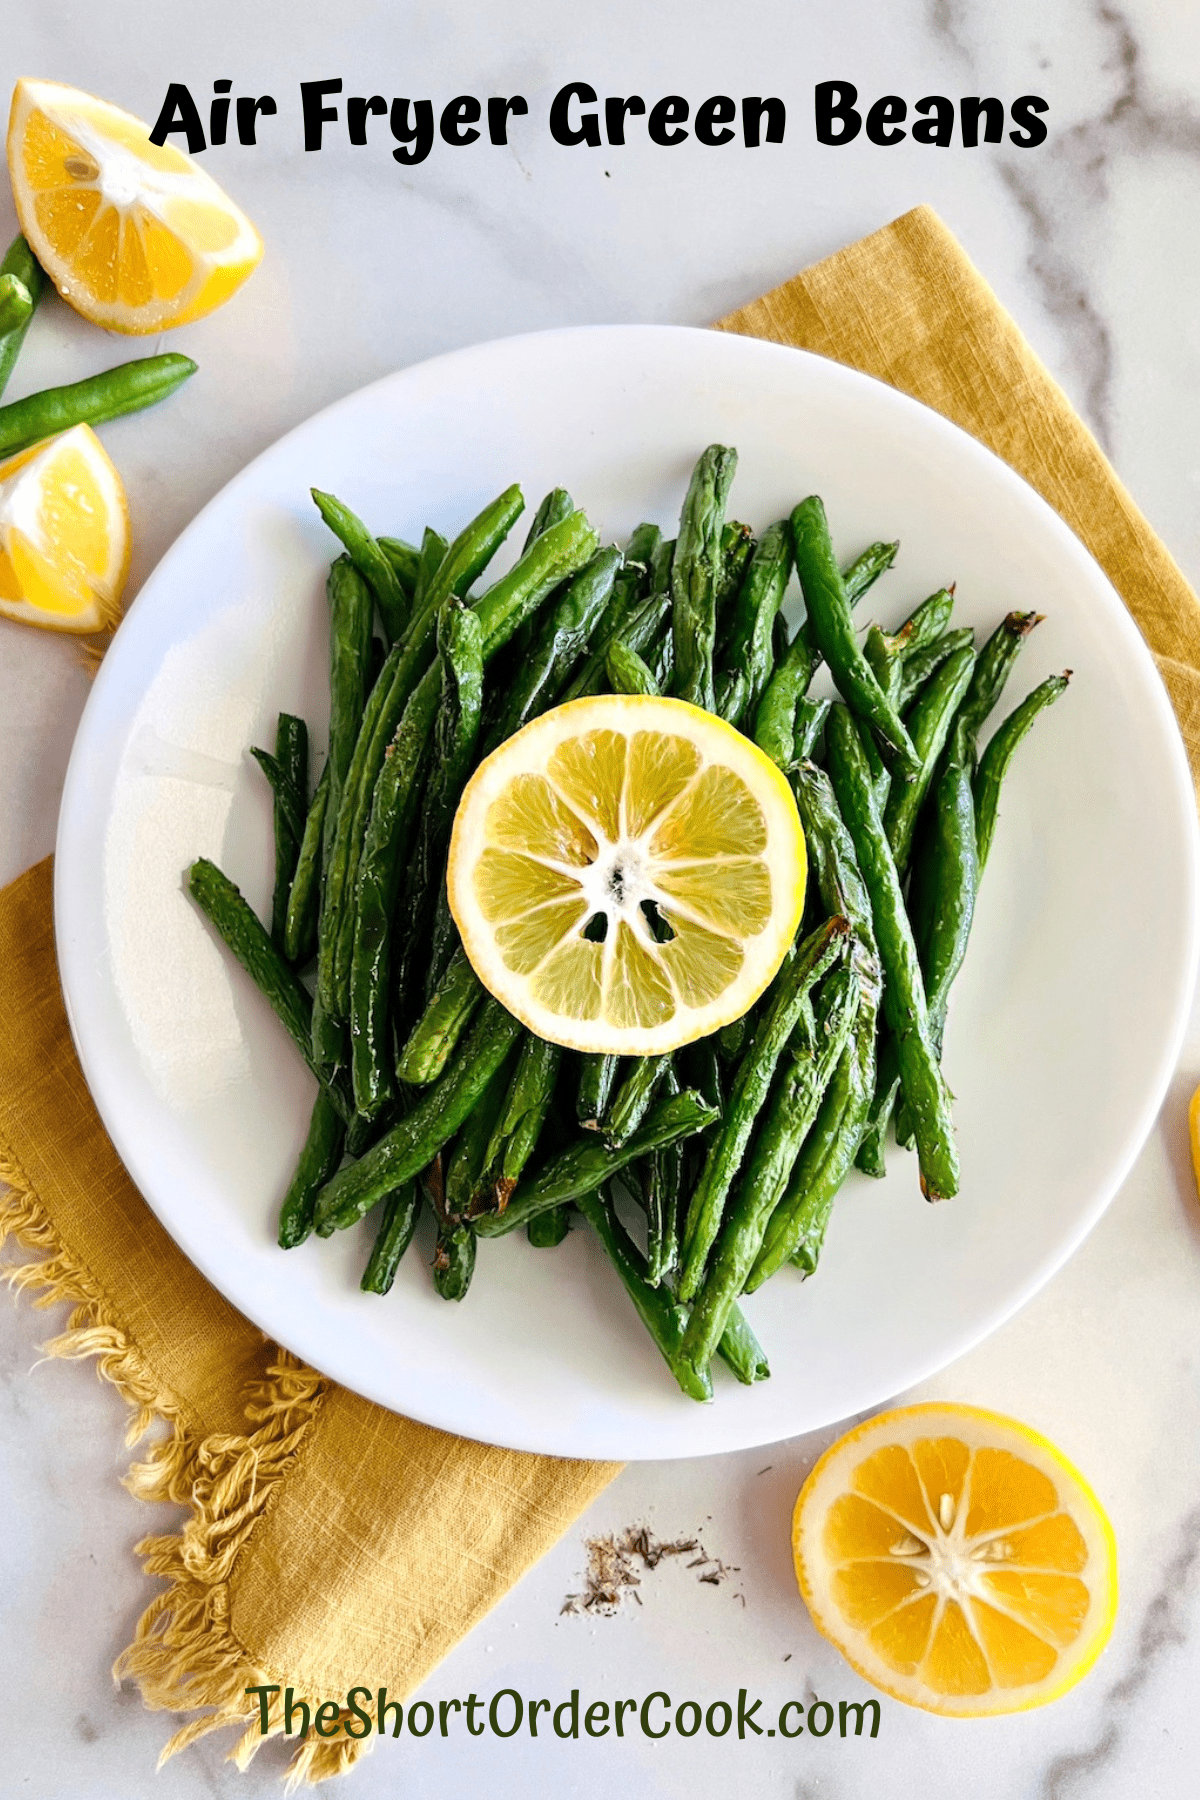 Air Fryer Green Beans on a white plate & topped with a slice of lemon.